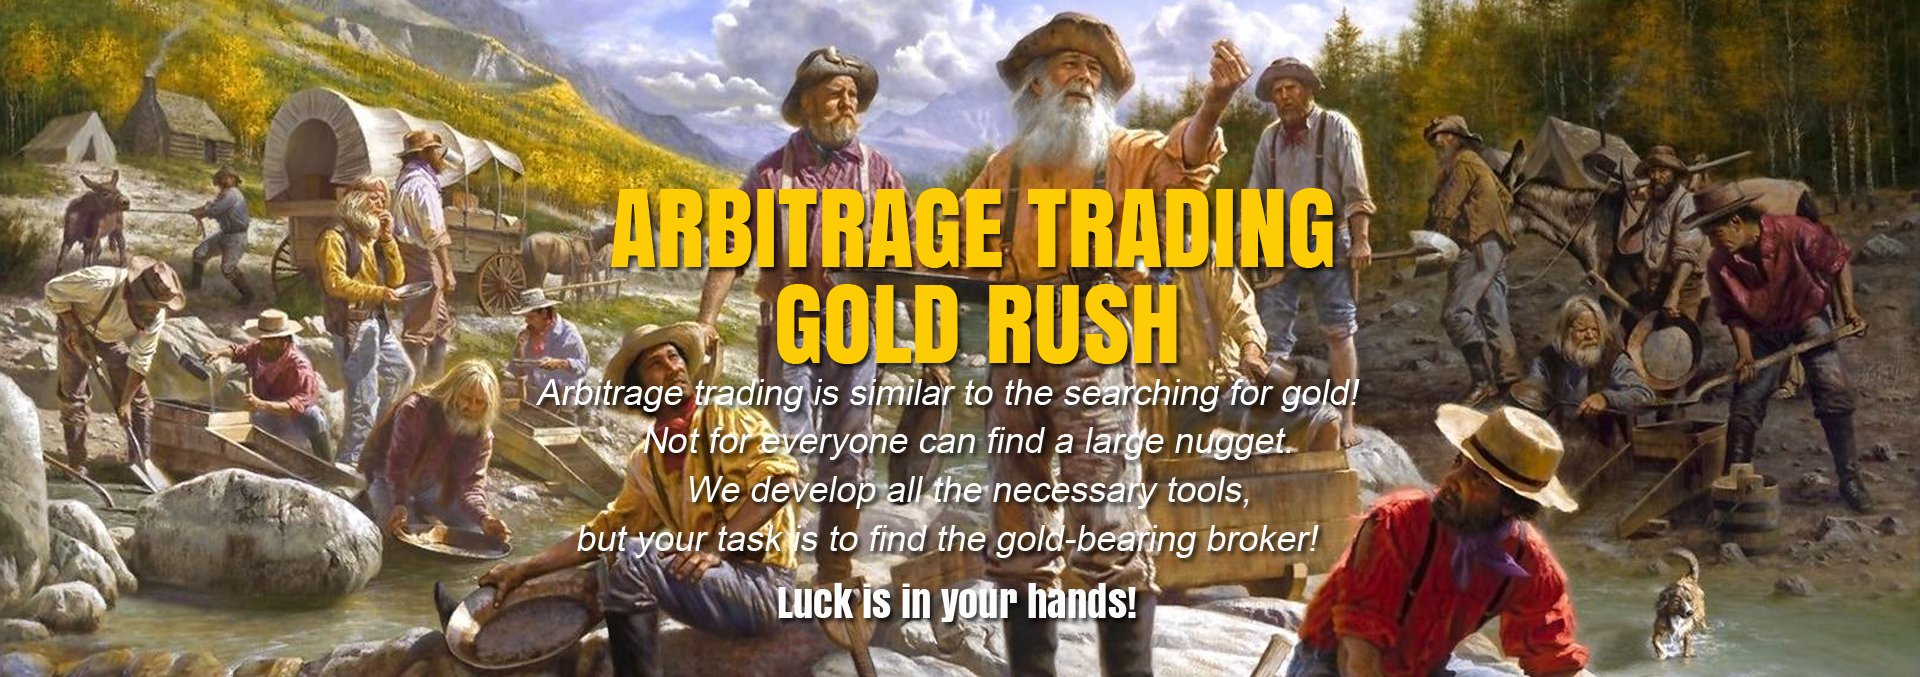 Arbitraging gold and forex